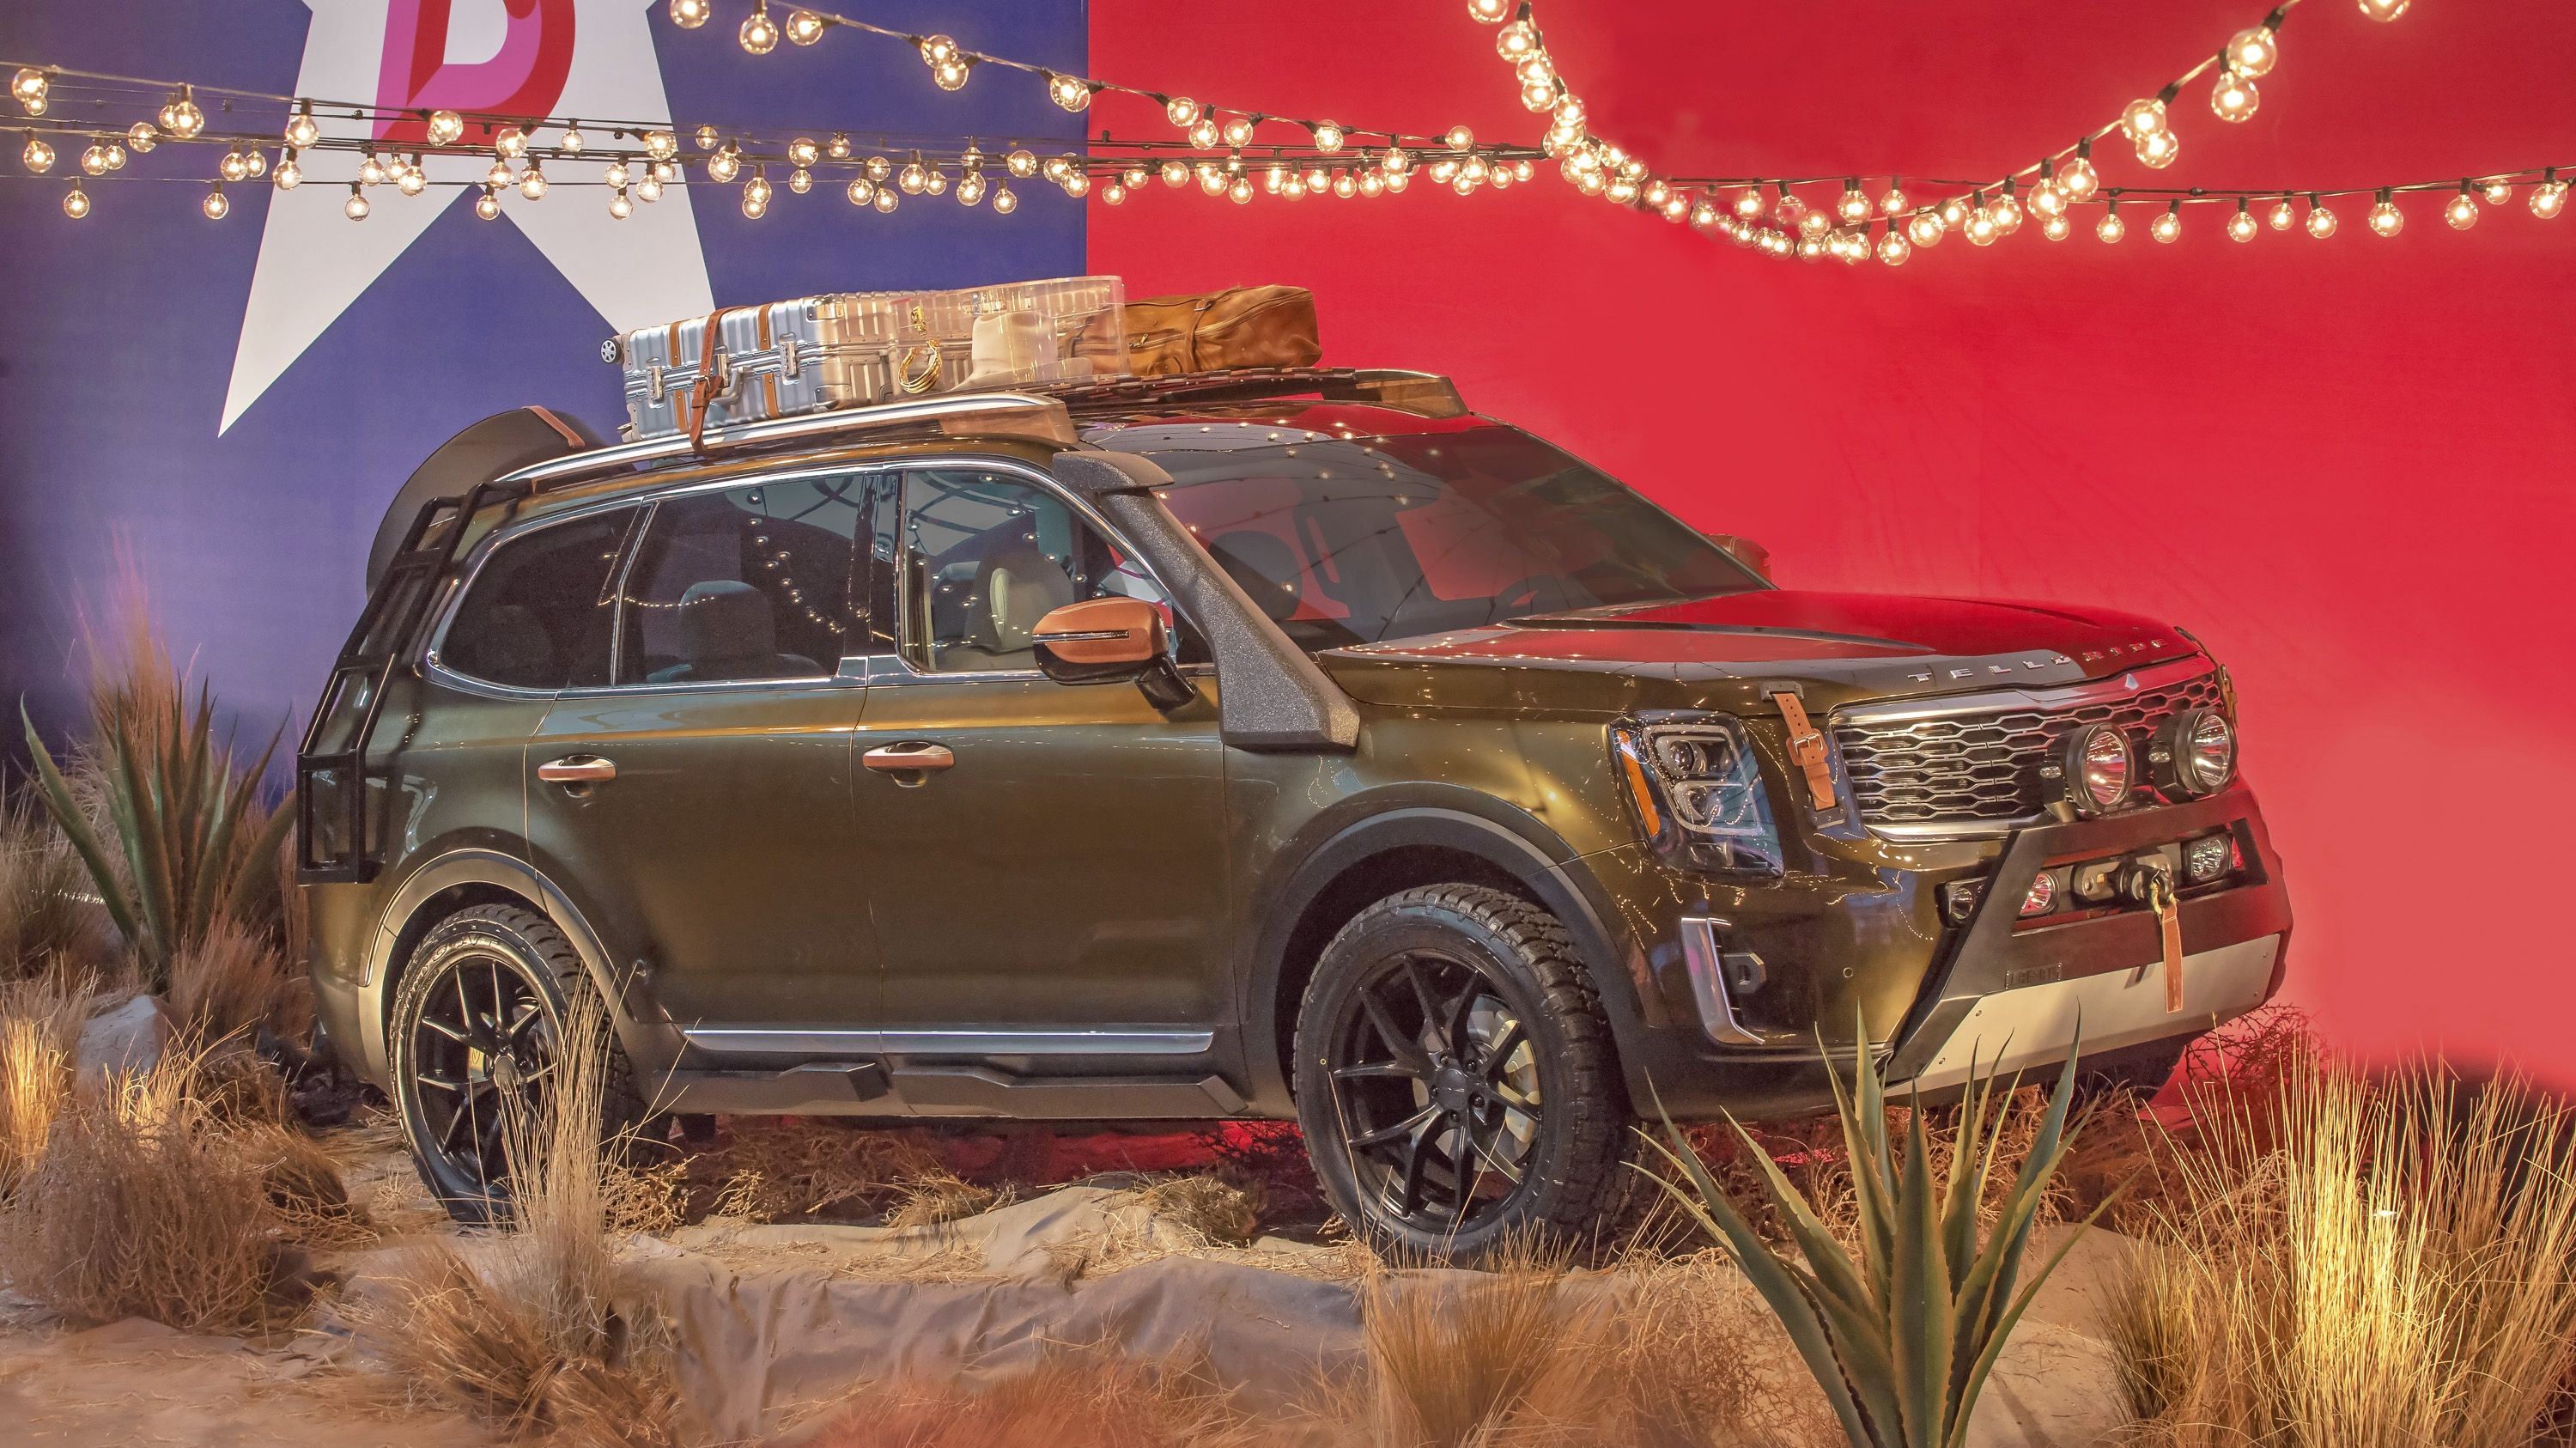 2019 - 2020 The Kia Telluride Debuts Looking More Like a Concept Than a Production Model